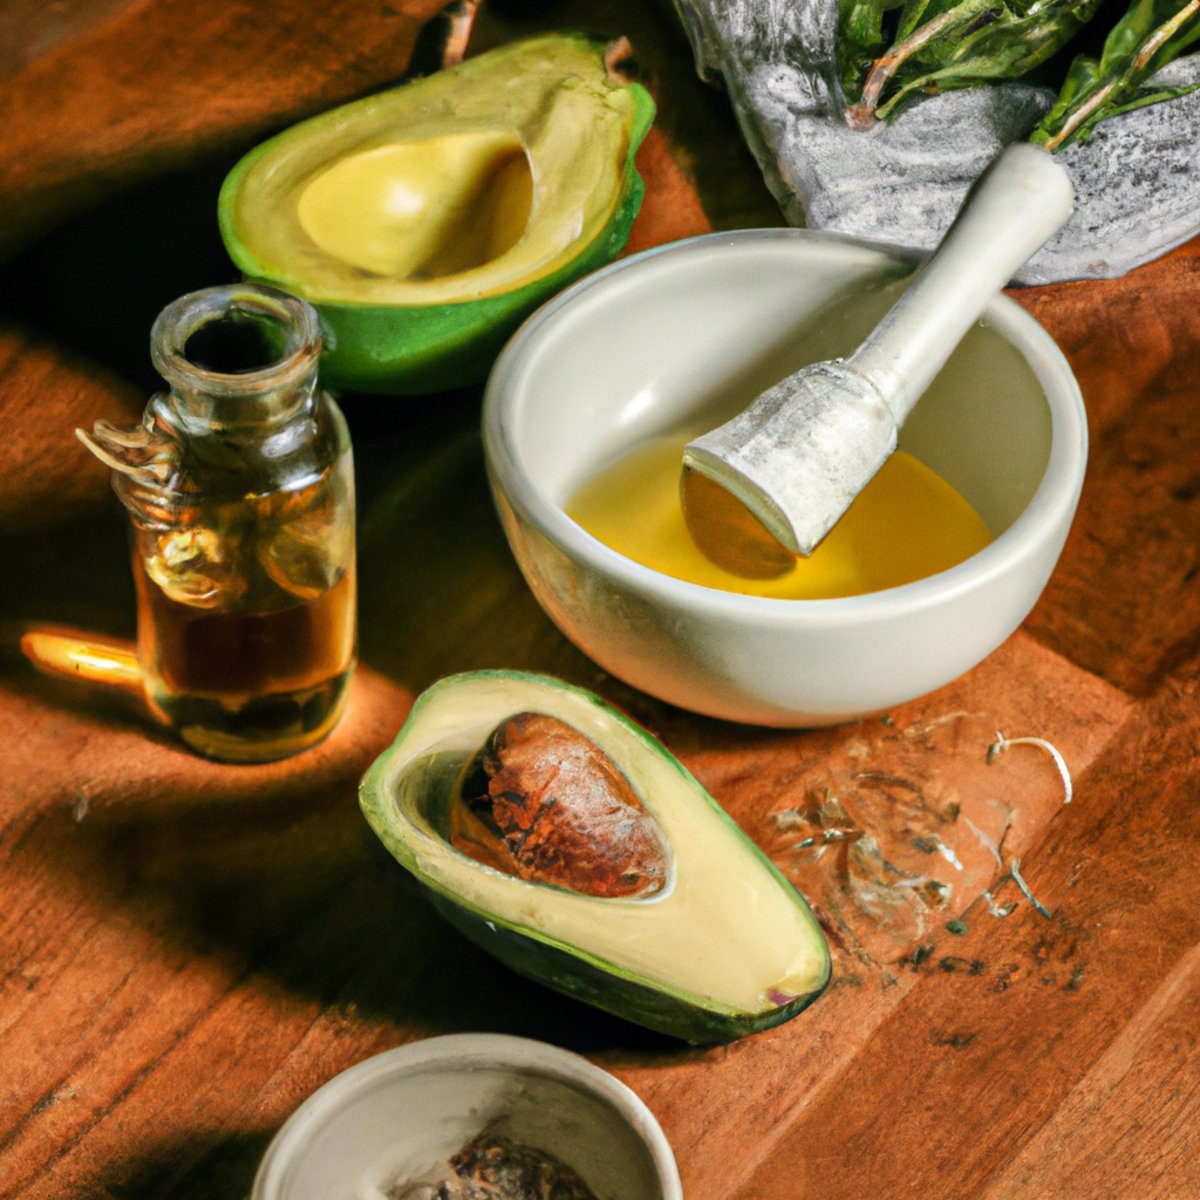 DIY hair care ingredients on wooden table with coconut oil, avocado, honey, rosemary, mortar and pestle, apple cider vinegar, and essential oils.